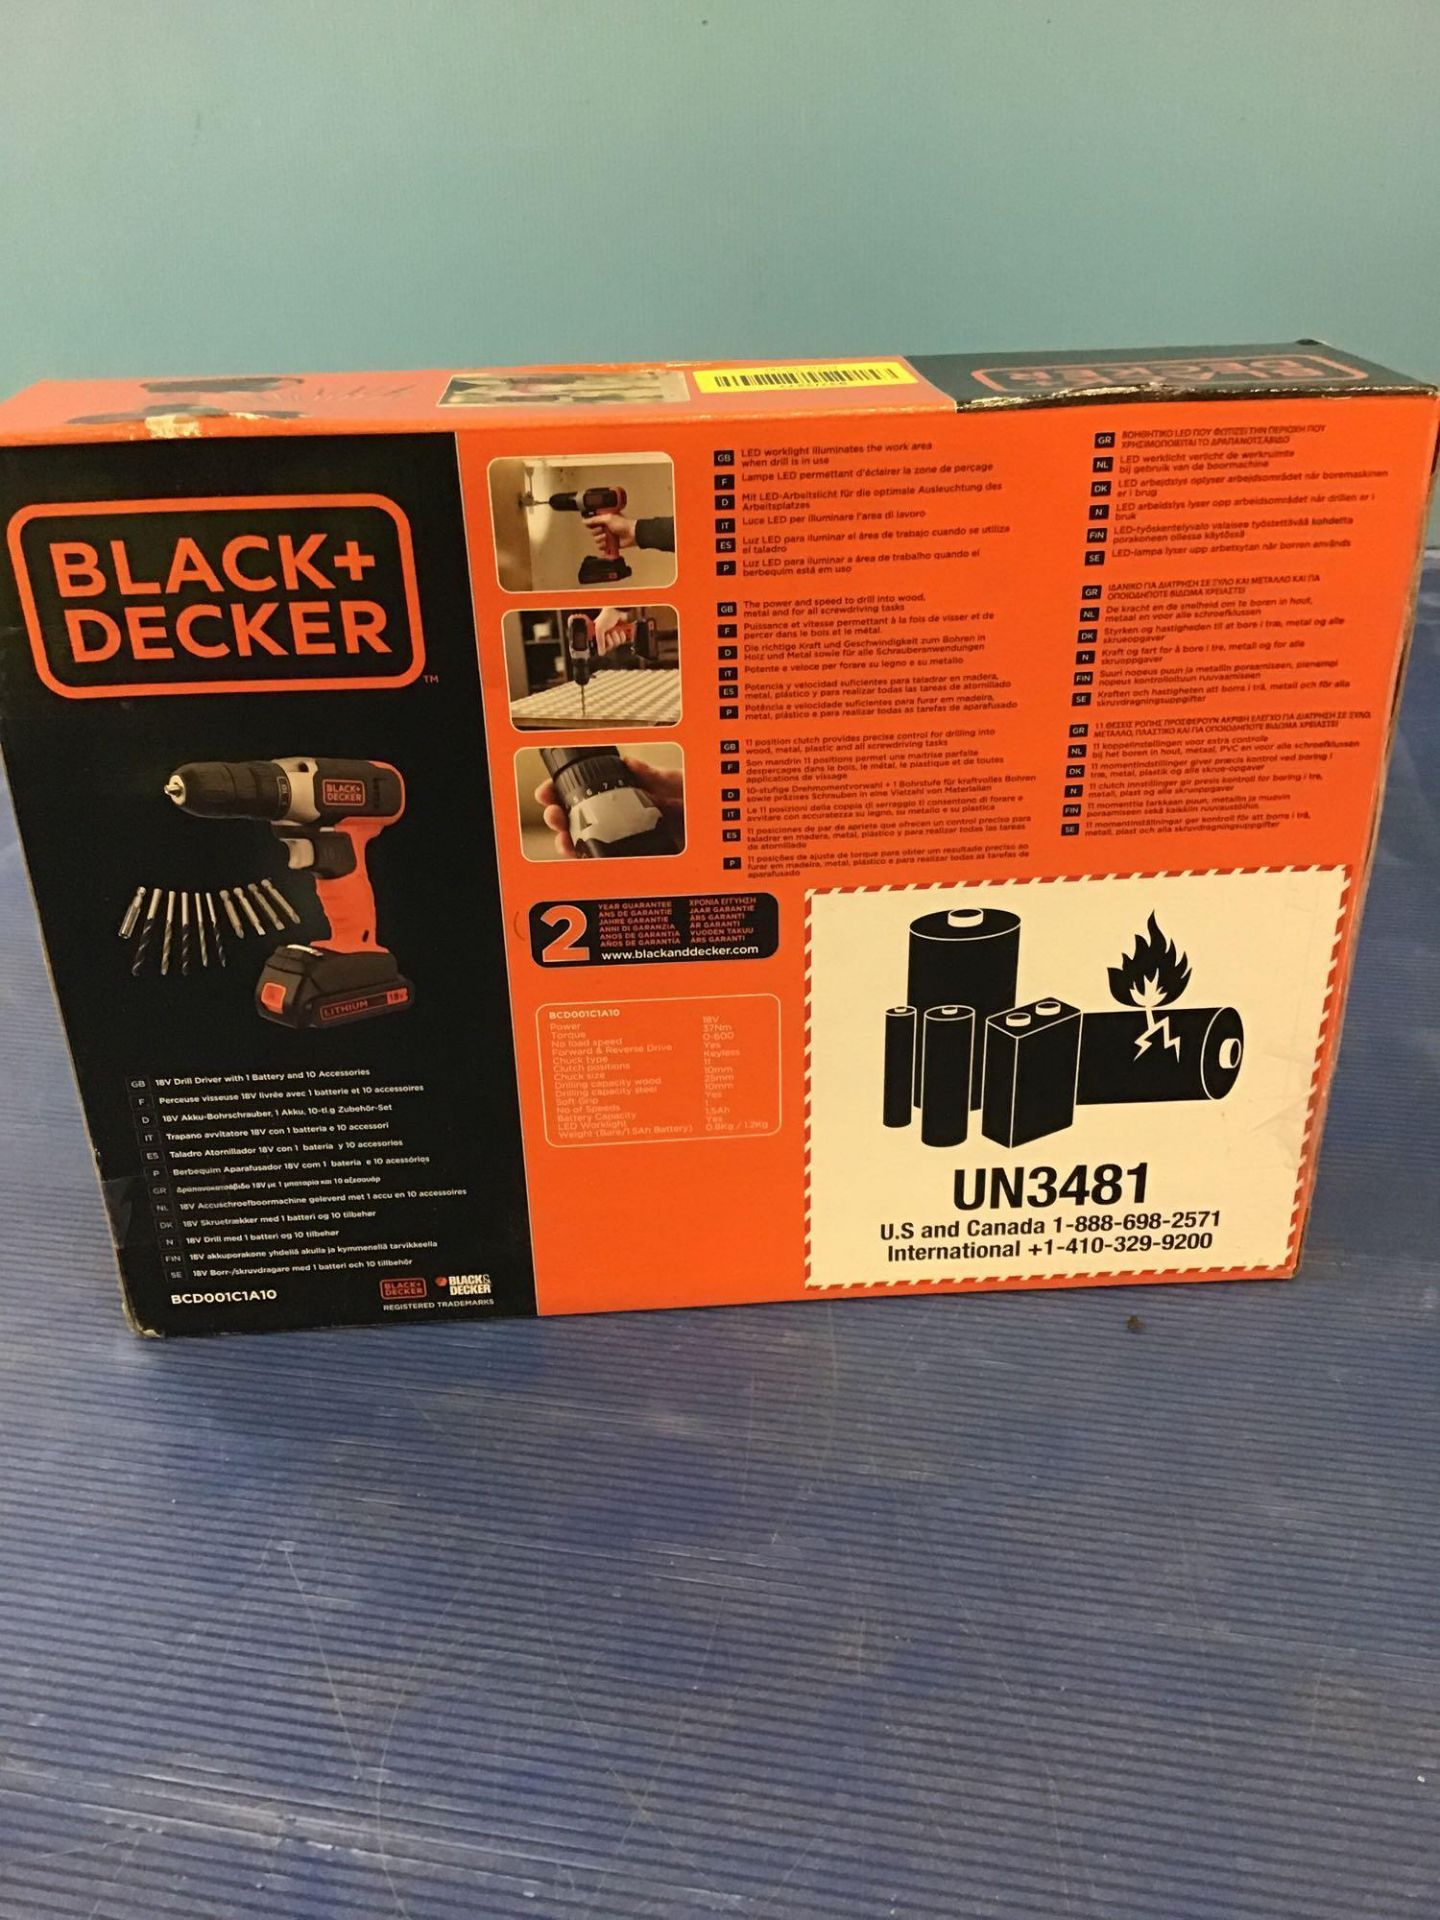 Black + Decker 18V Lithium-ion Drill Driver with Accessories, £50.00 RRP - Image 4 of 6